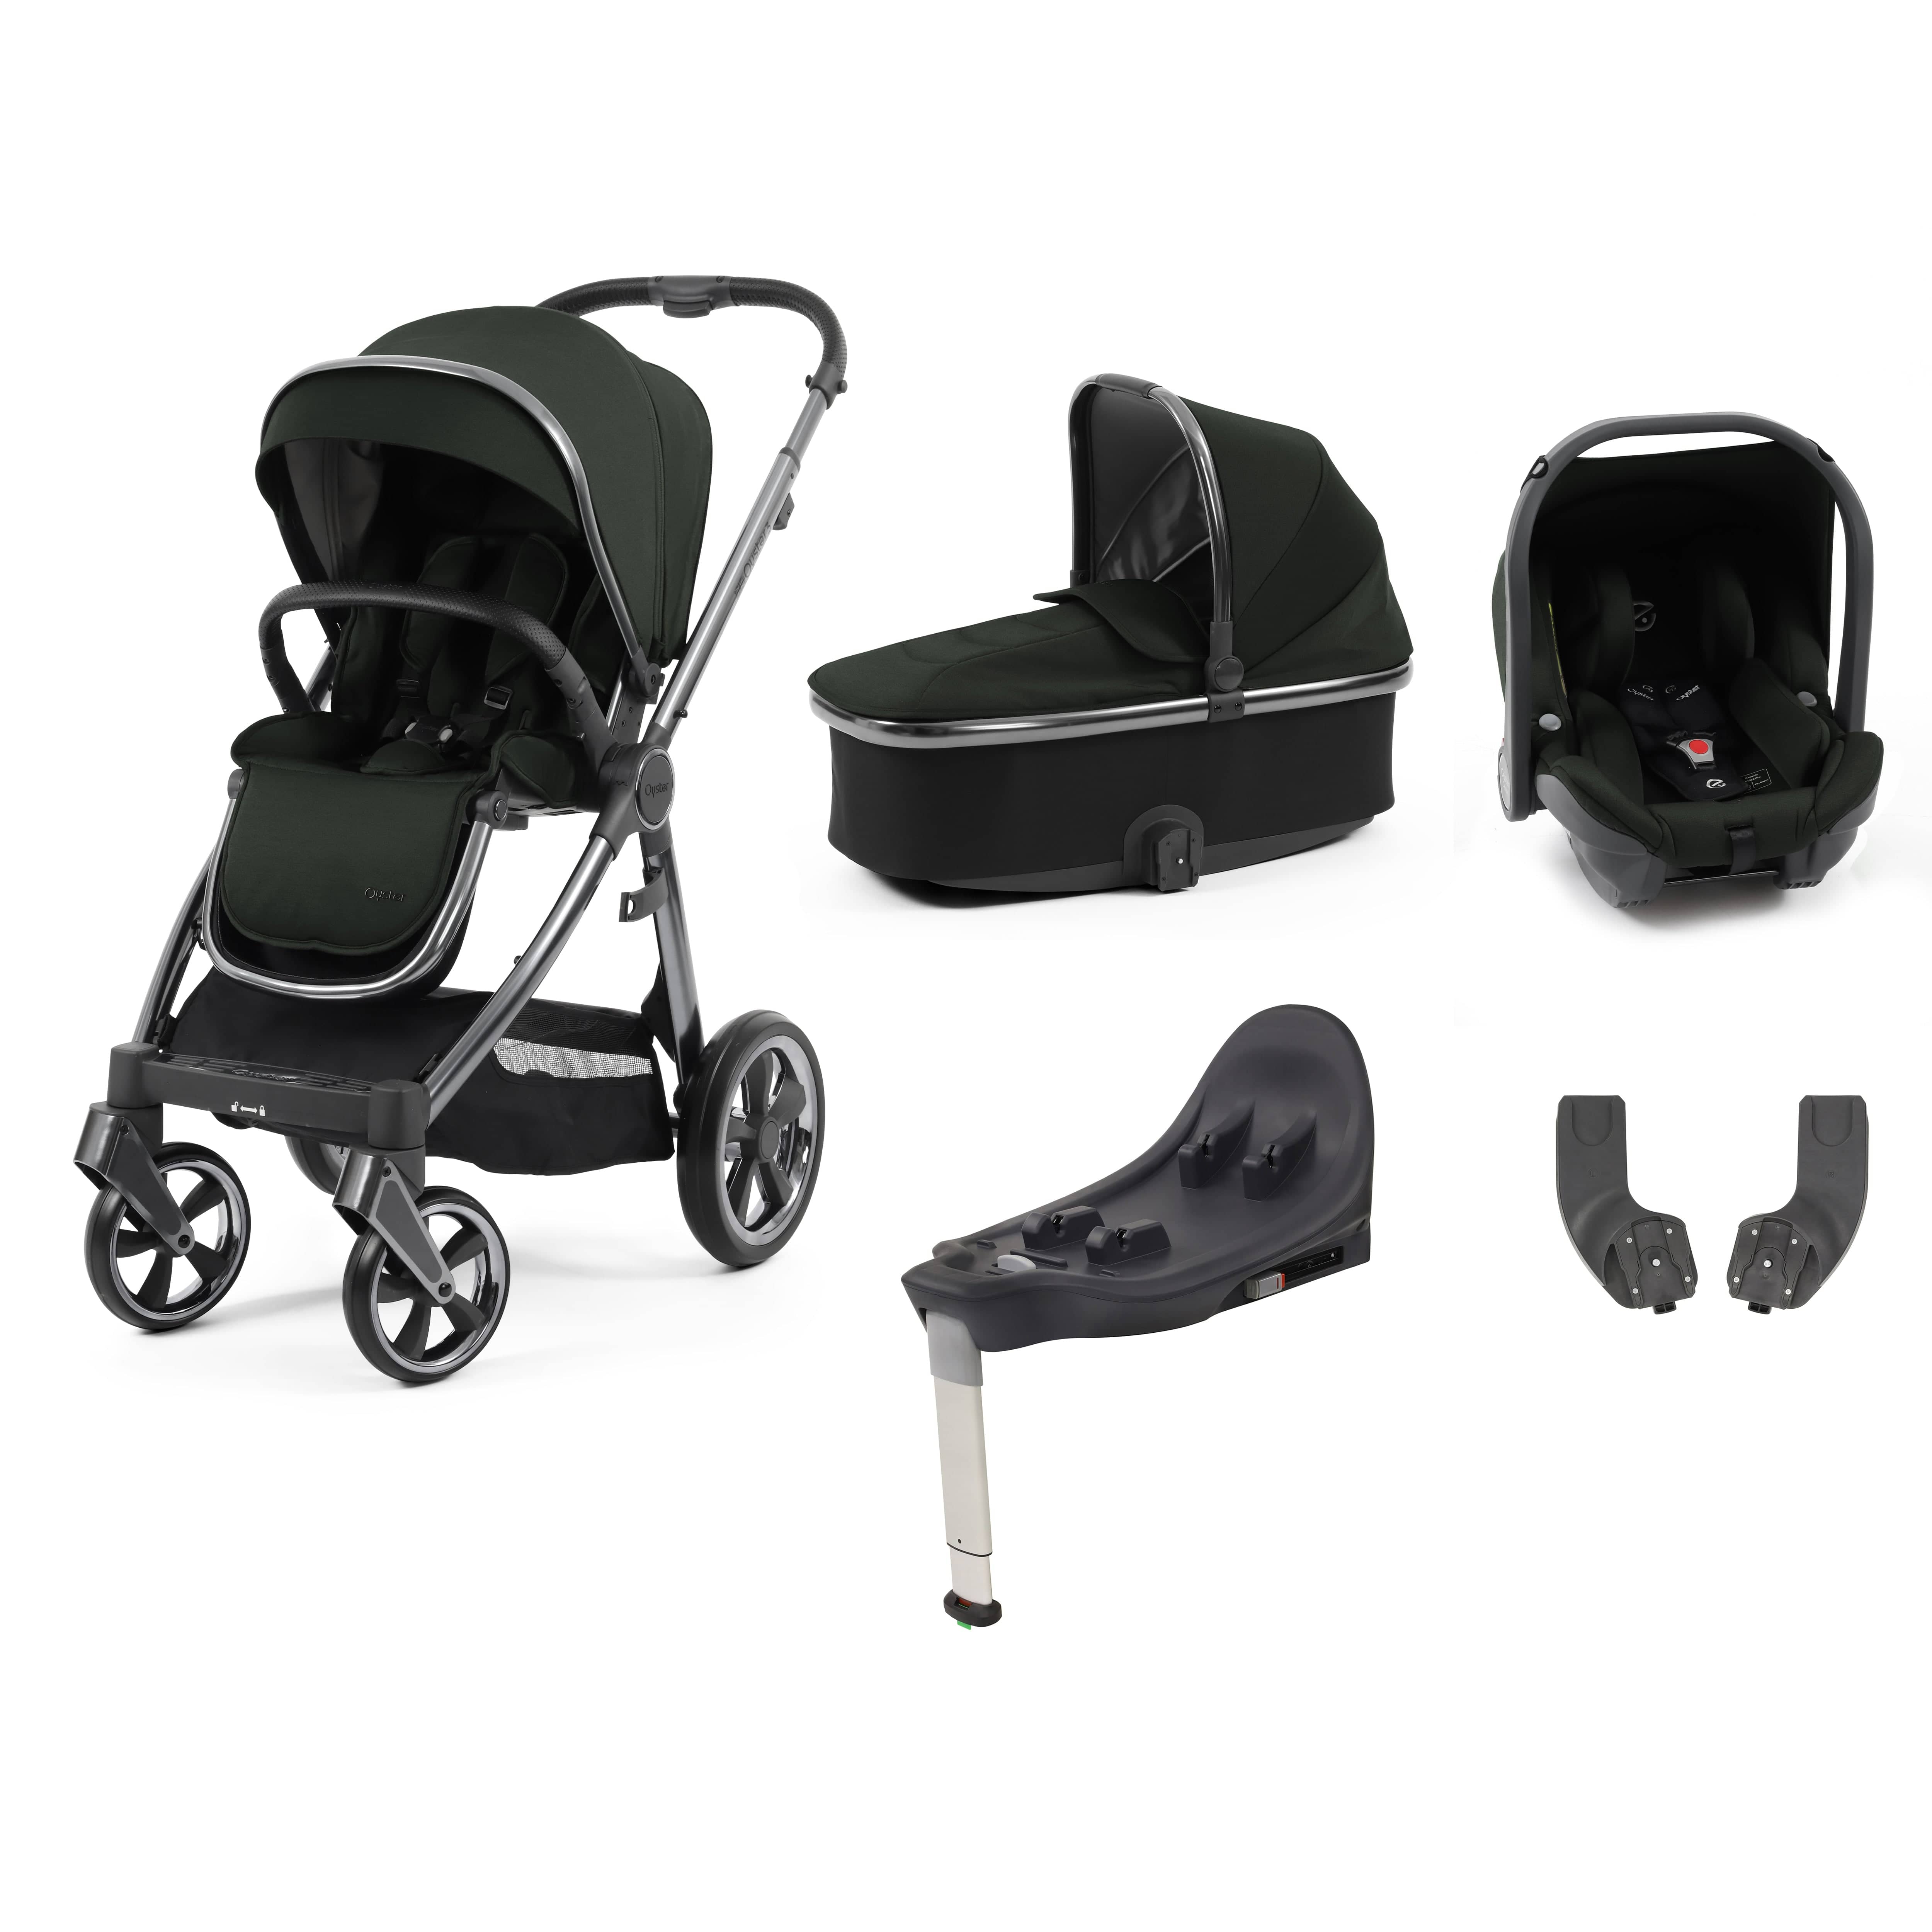 Babystyle Oyster 3 Essential Bundle with Car Seat in Black Olive Travel Systems 14735-BLO 5060711567211